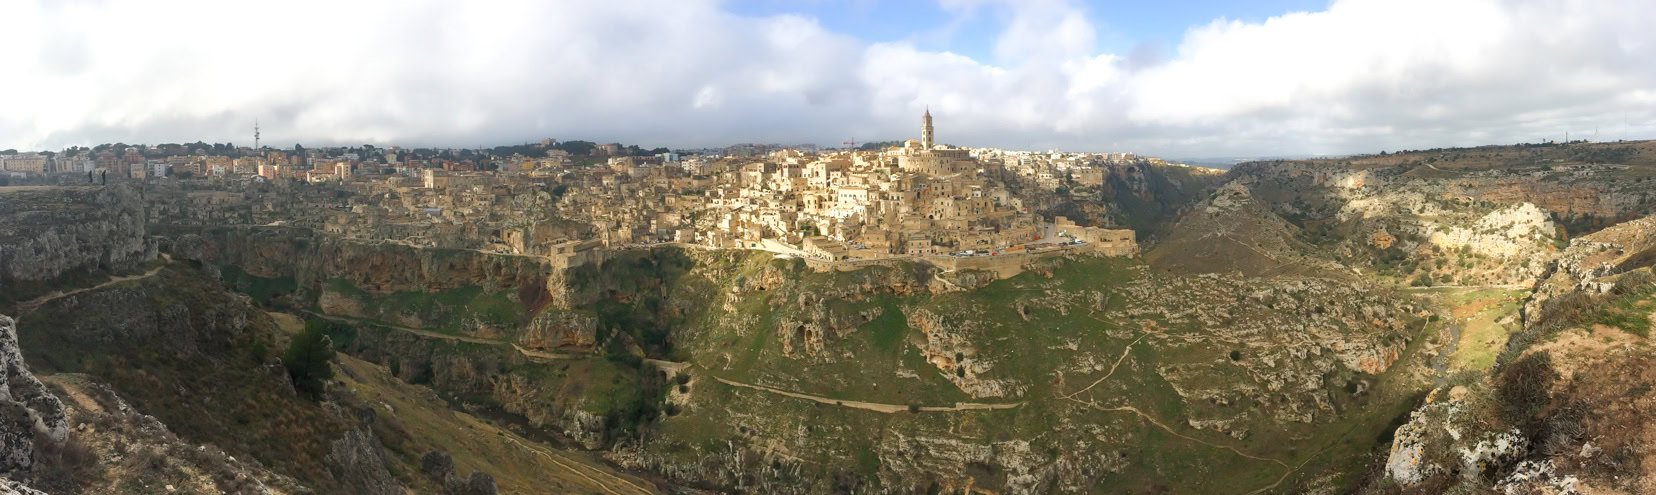 View of Matera from the viewpoint